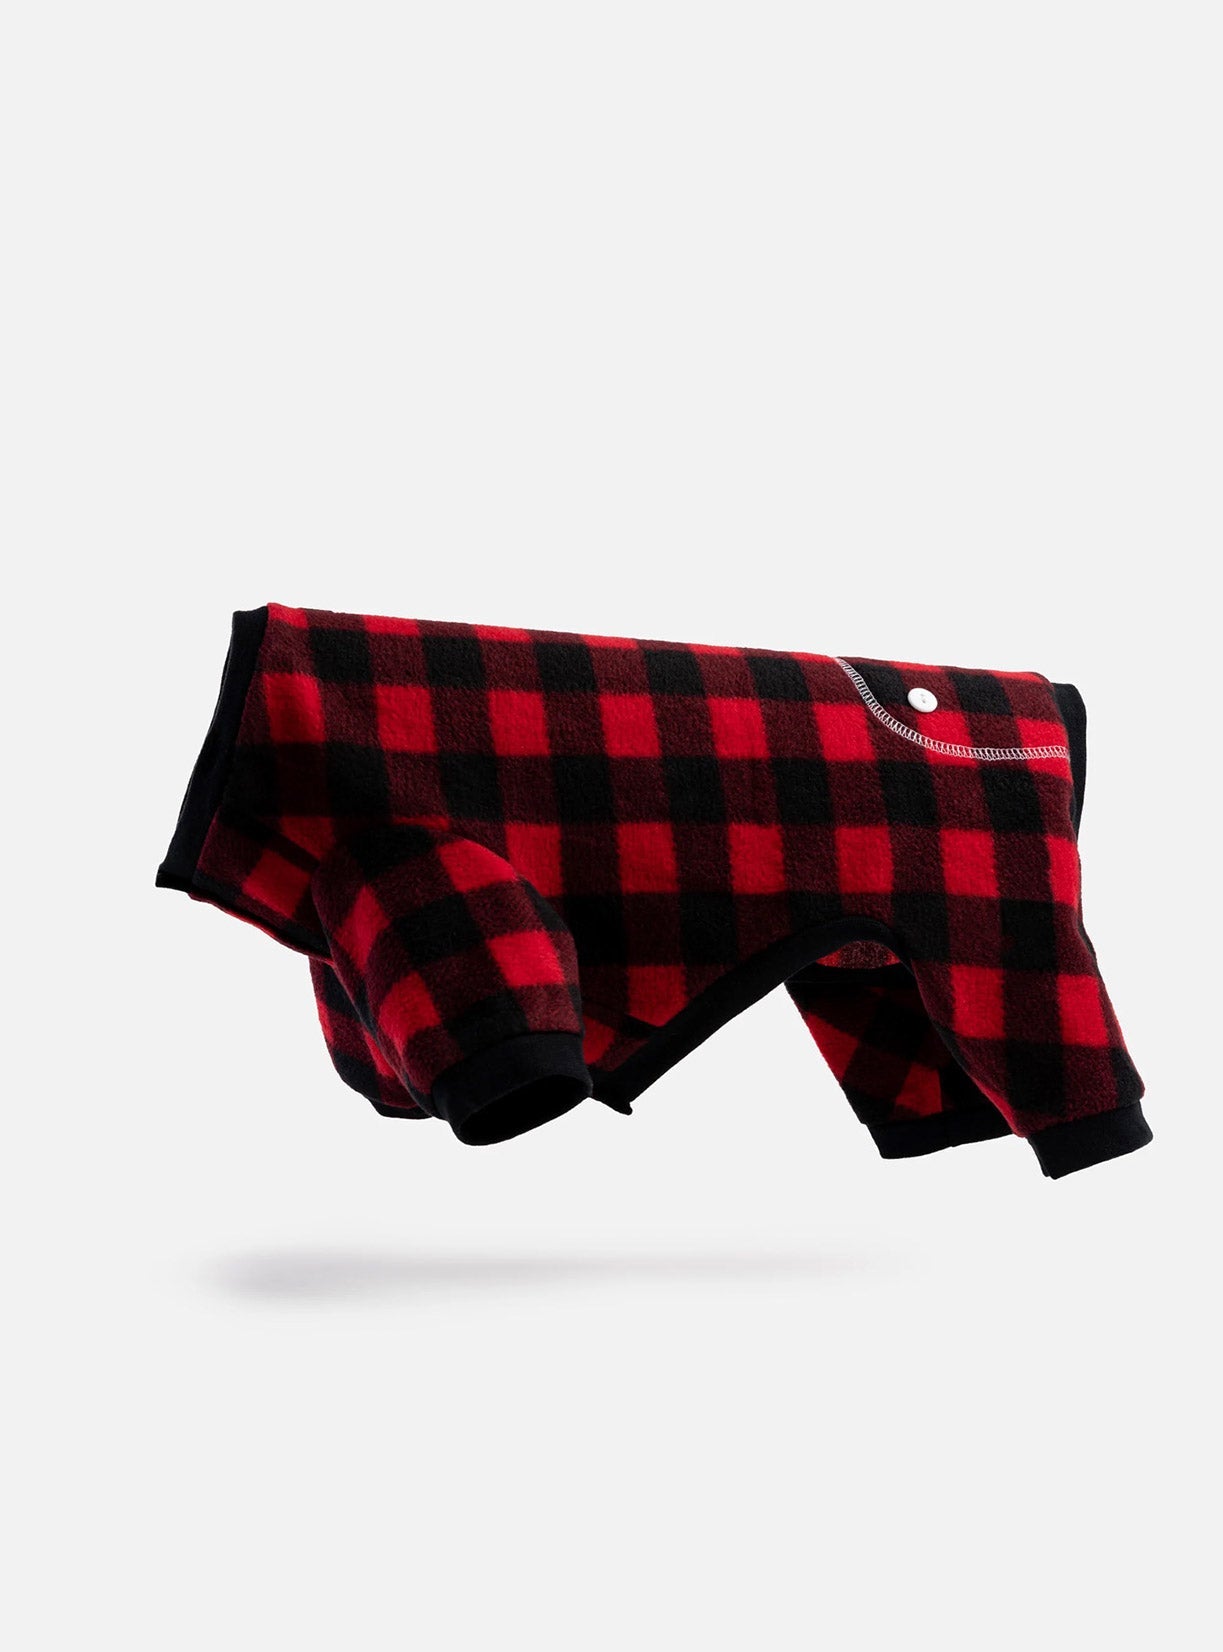 Buy One Dog Onesie Plaid Red Get Free Human Matching - Silver Paw - 8372683 Canada Inc.